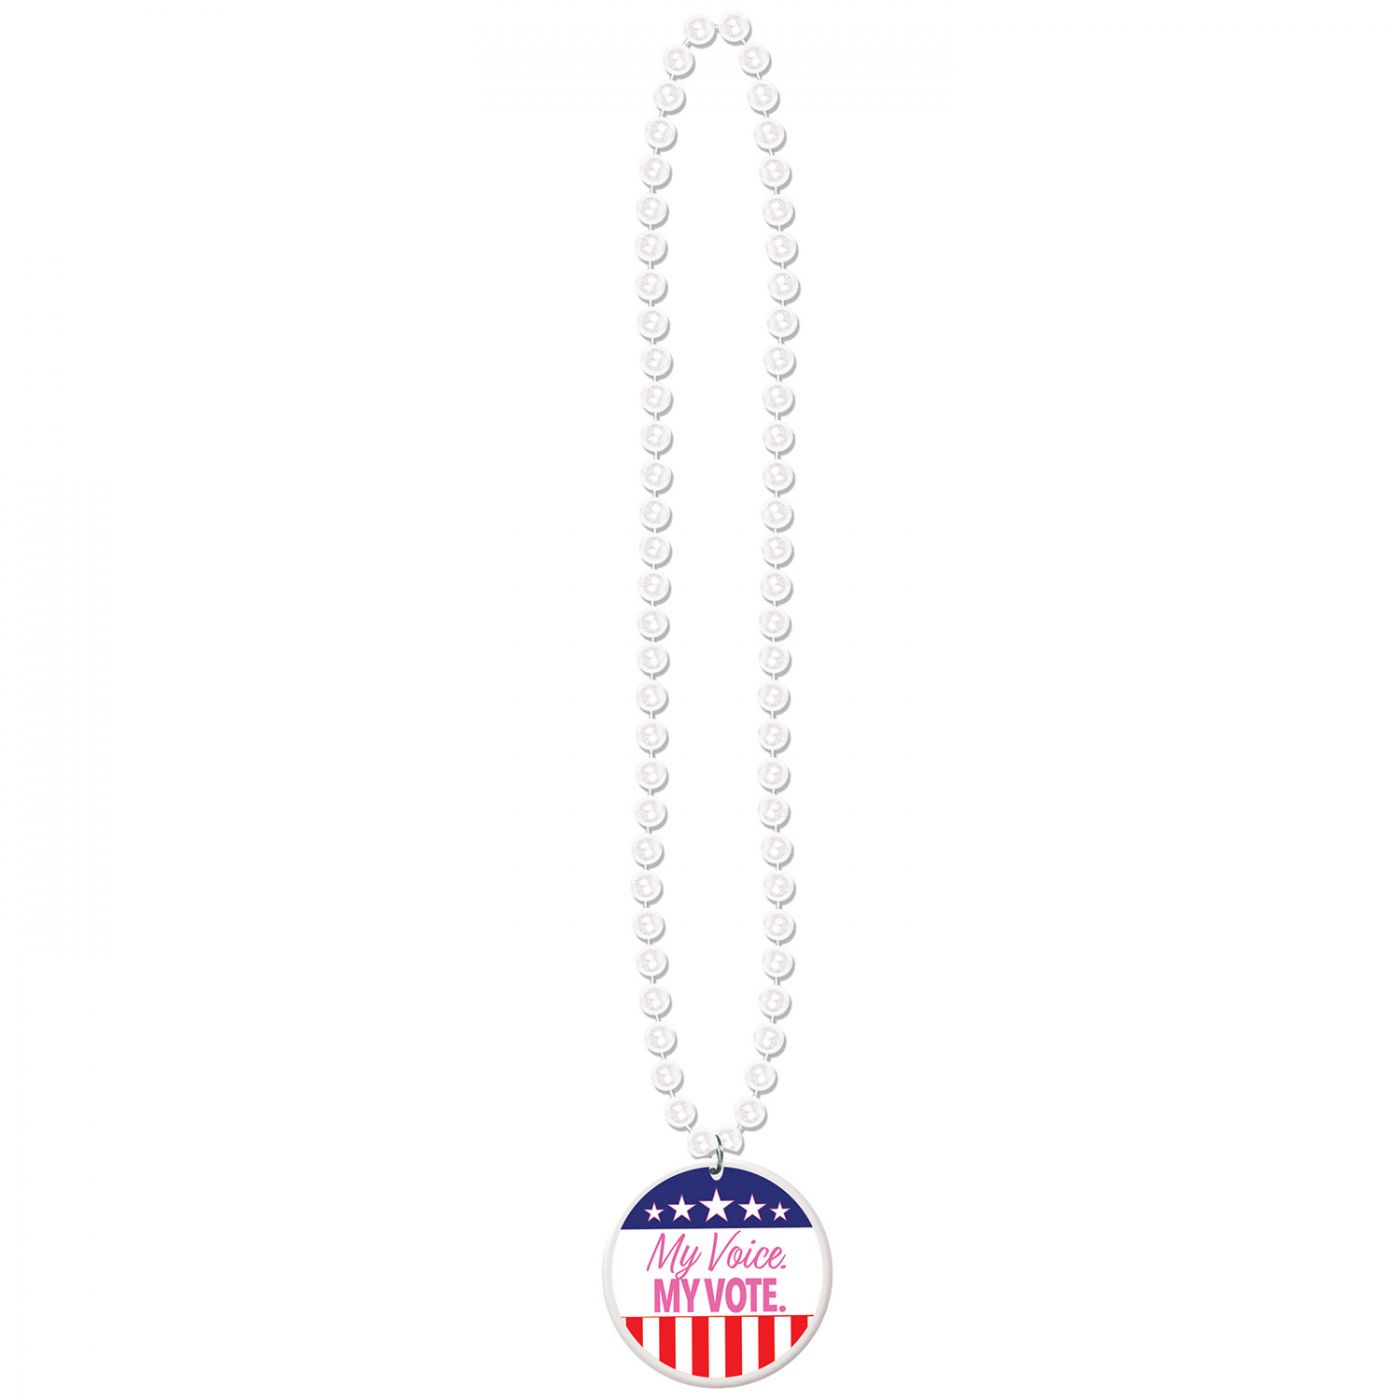 Image of Beads w/My Voice. My Vote. Medallion